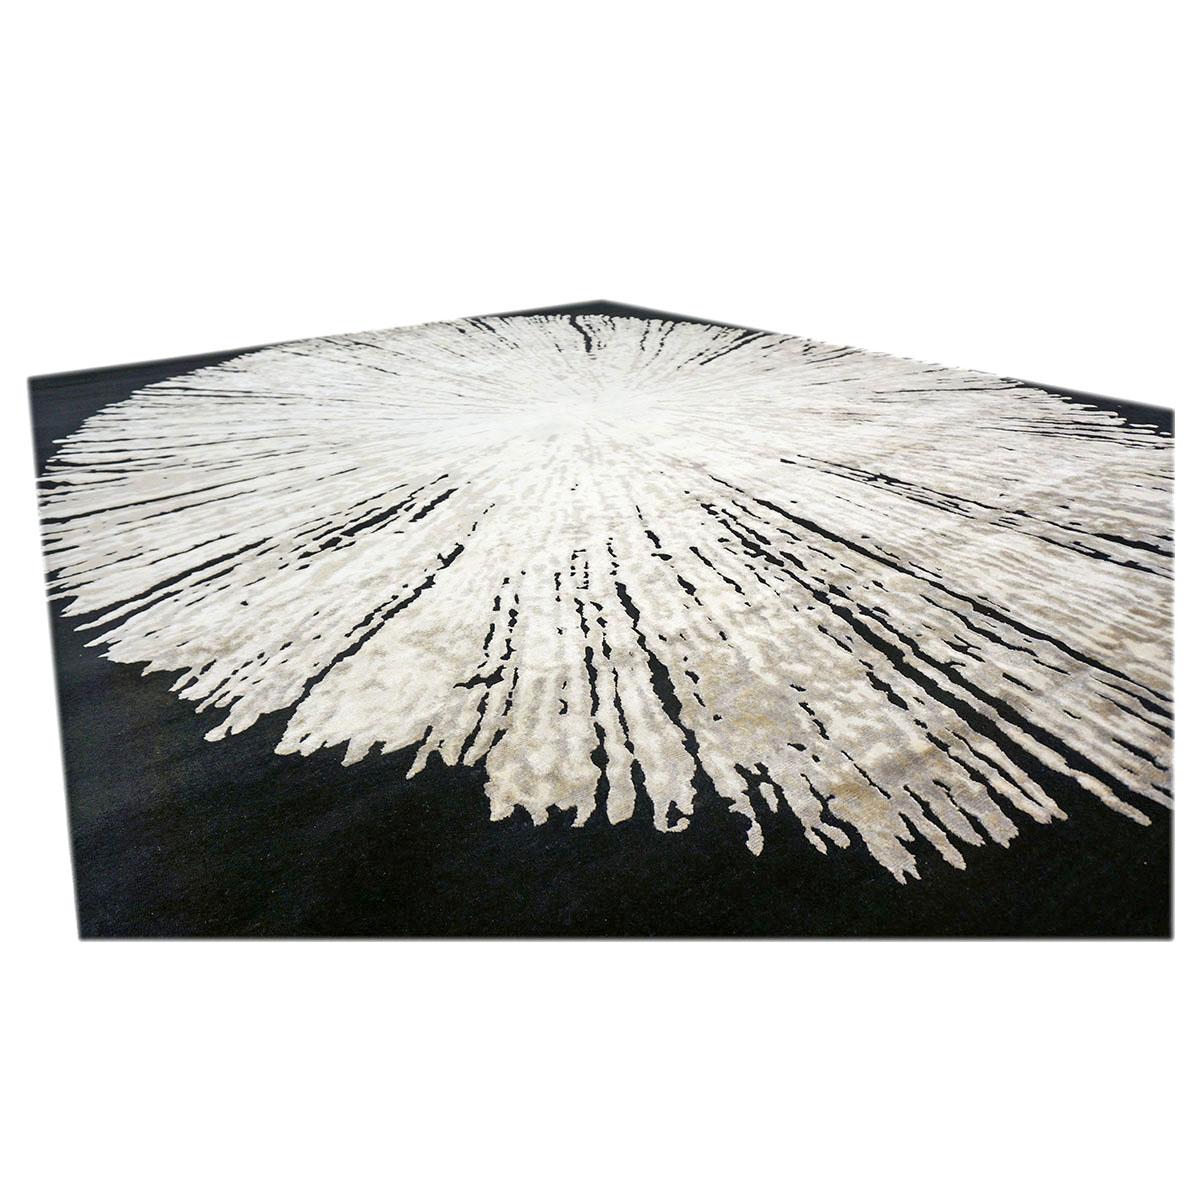 10x14 black and white rug